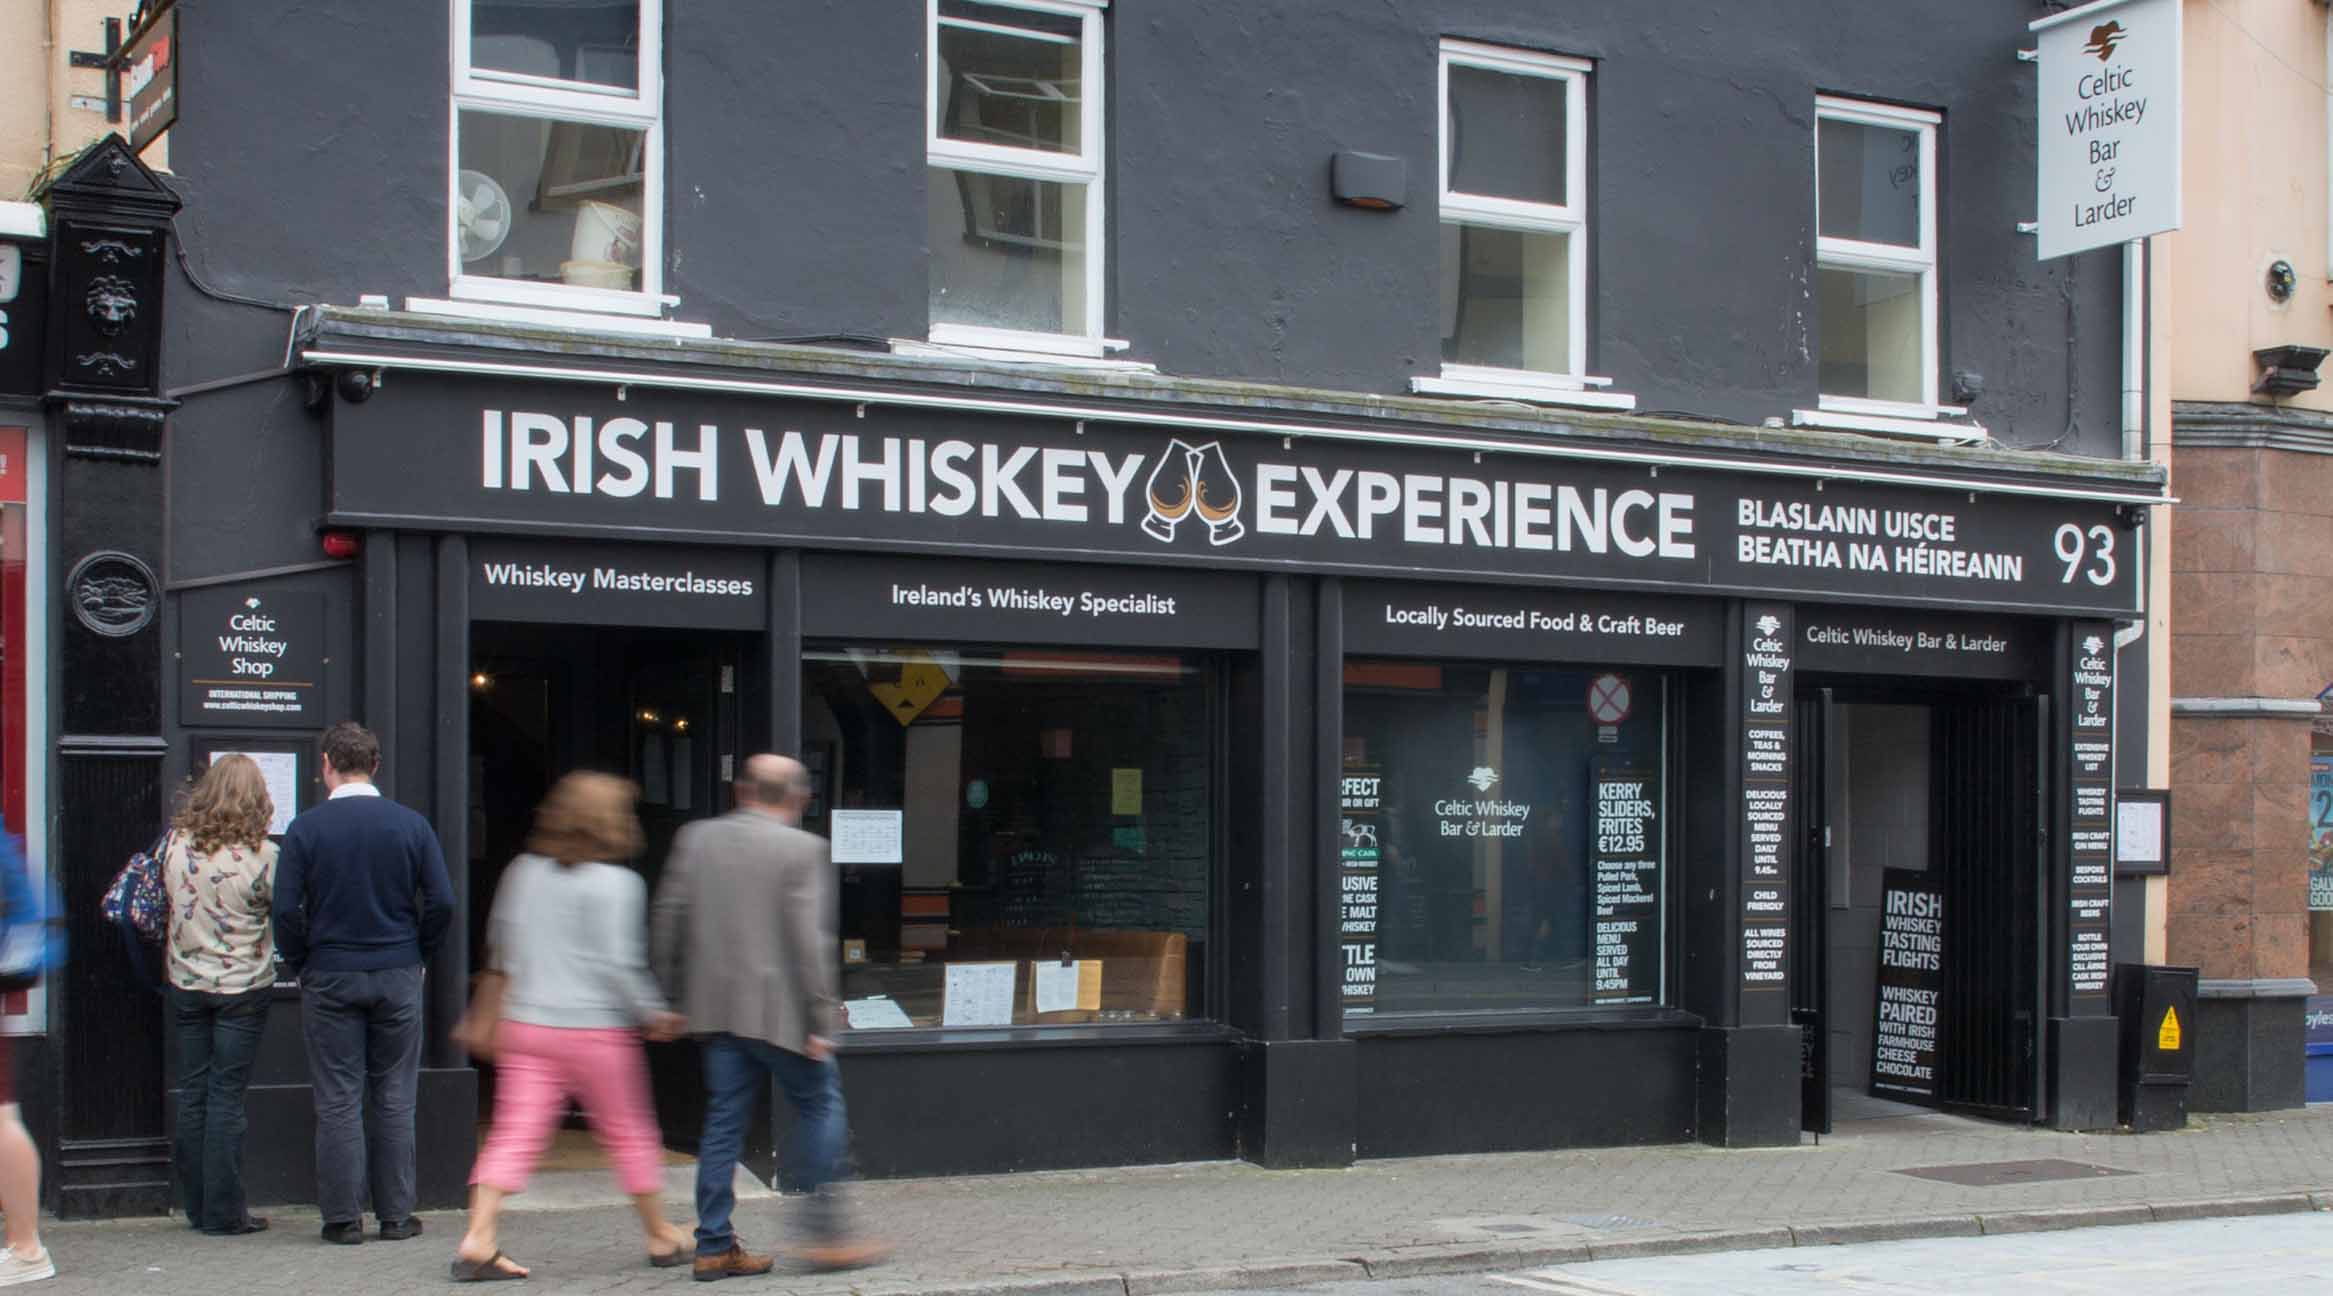 The Irish Whiskey Experience in Killarney won the Whisky Visitor Attraction of the Year (Rest of the World) award.